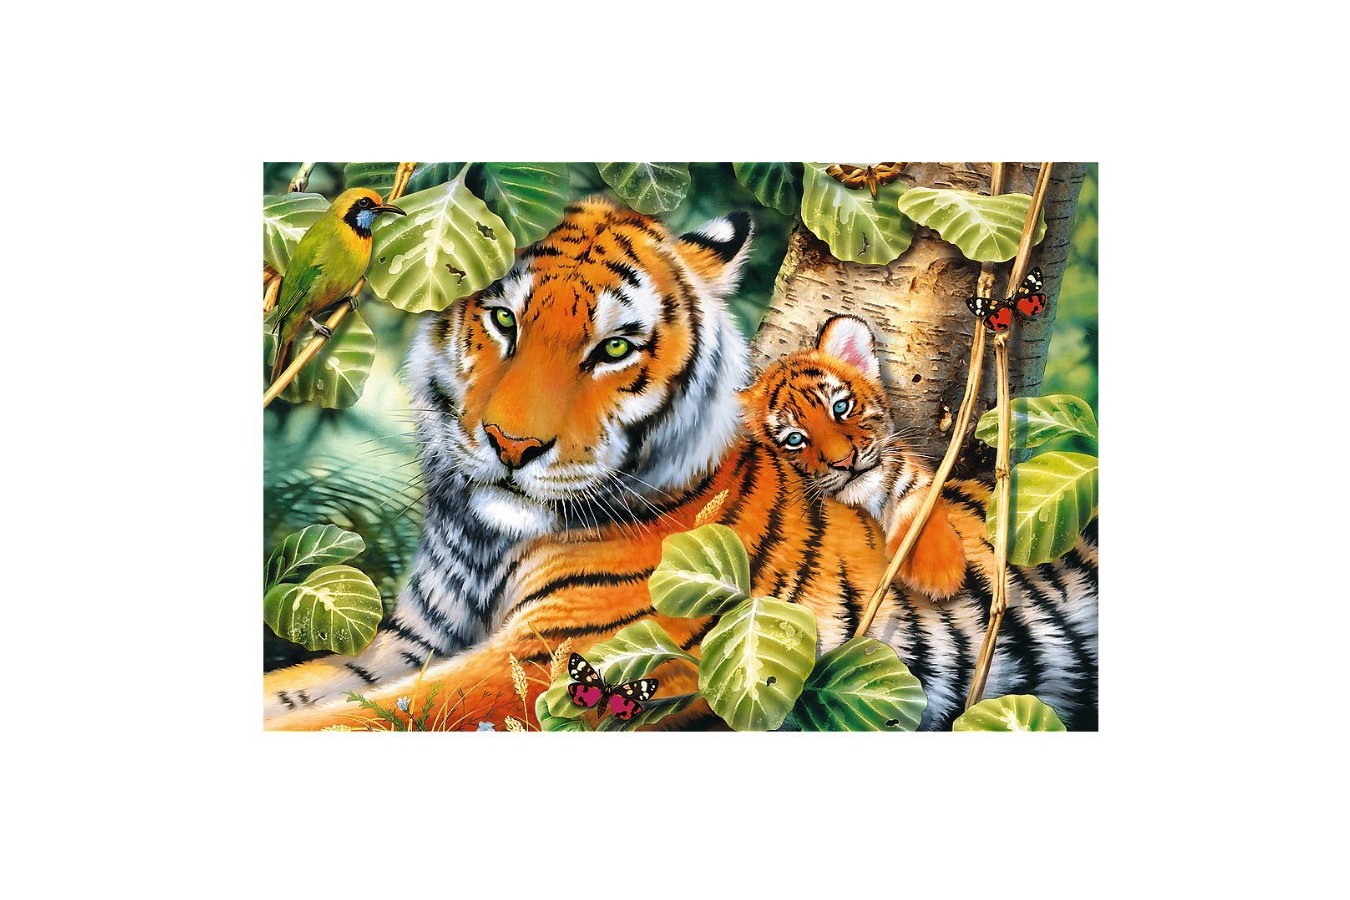 Puzzle Trefl - Two Tigers, 1500 piese (26159)